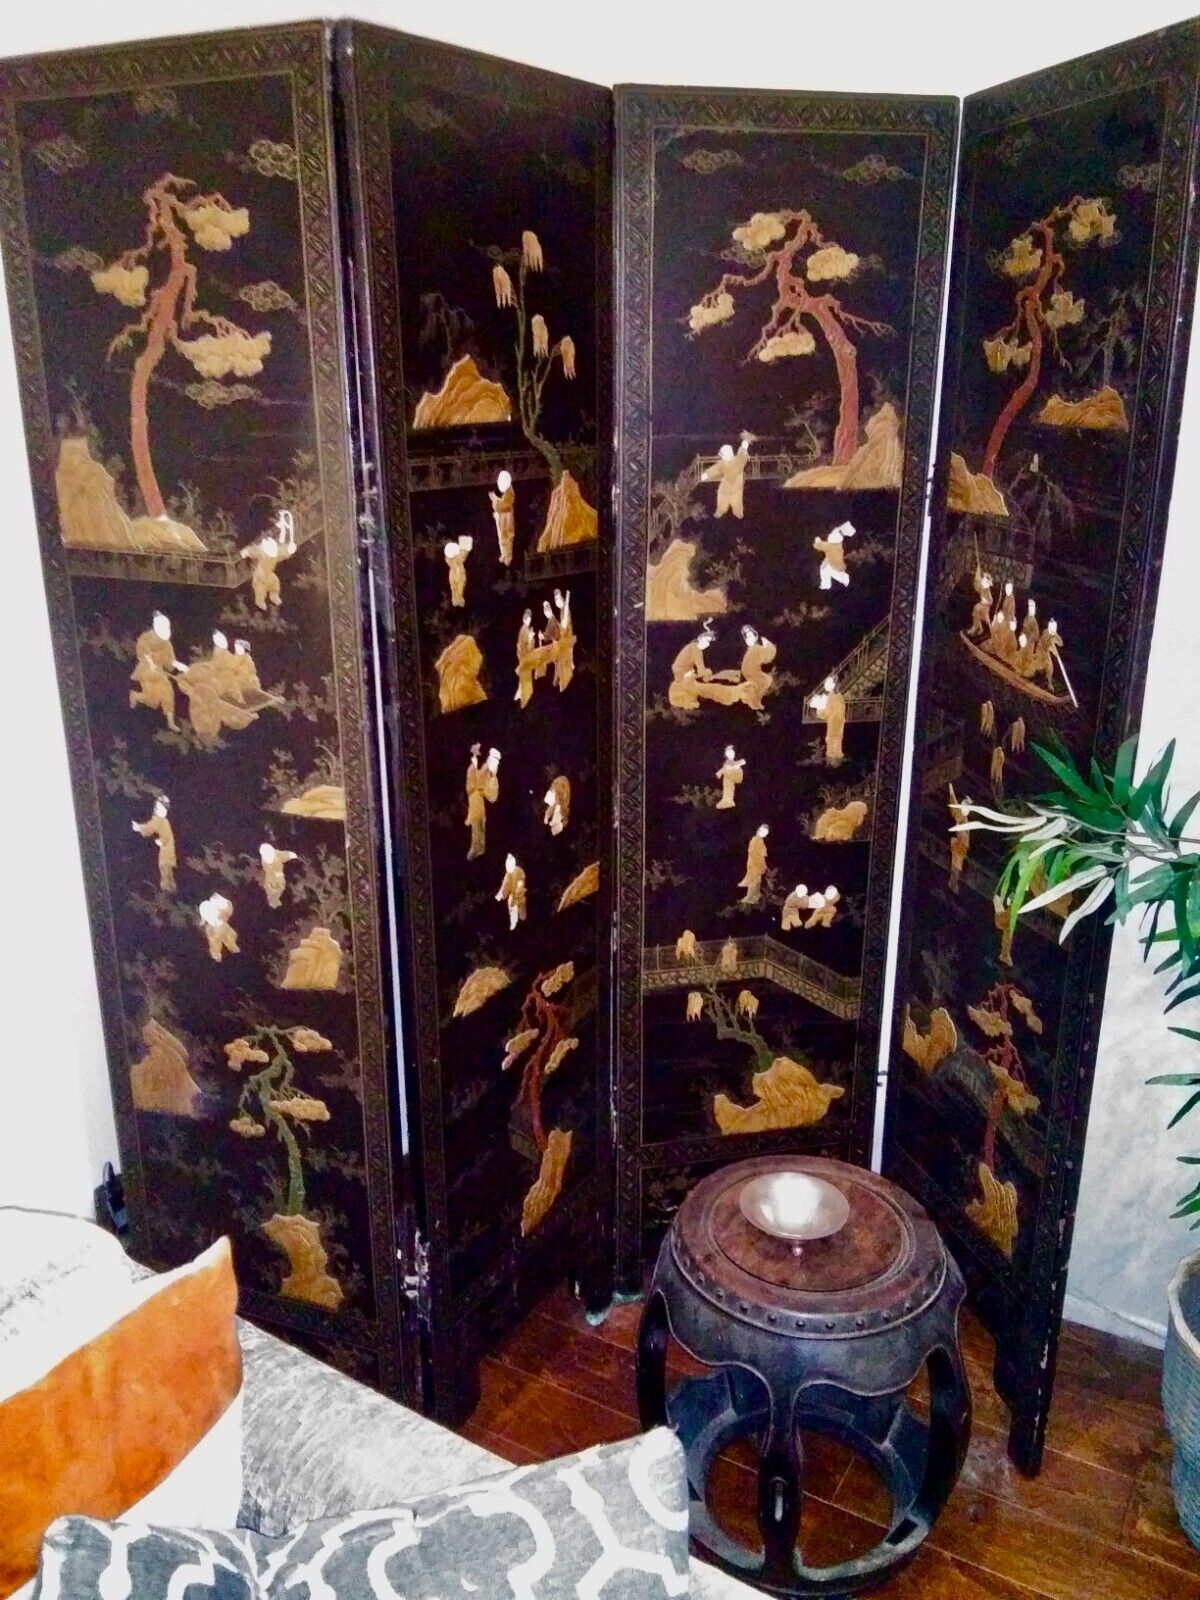 ANTIQUE CHINESE BLACK LACQUER SCREEN Mother of Pearl-EXQUISITE! RARE19th C. Без бренда